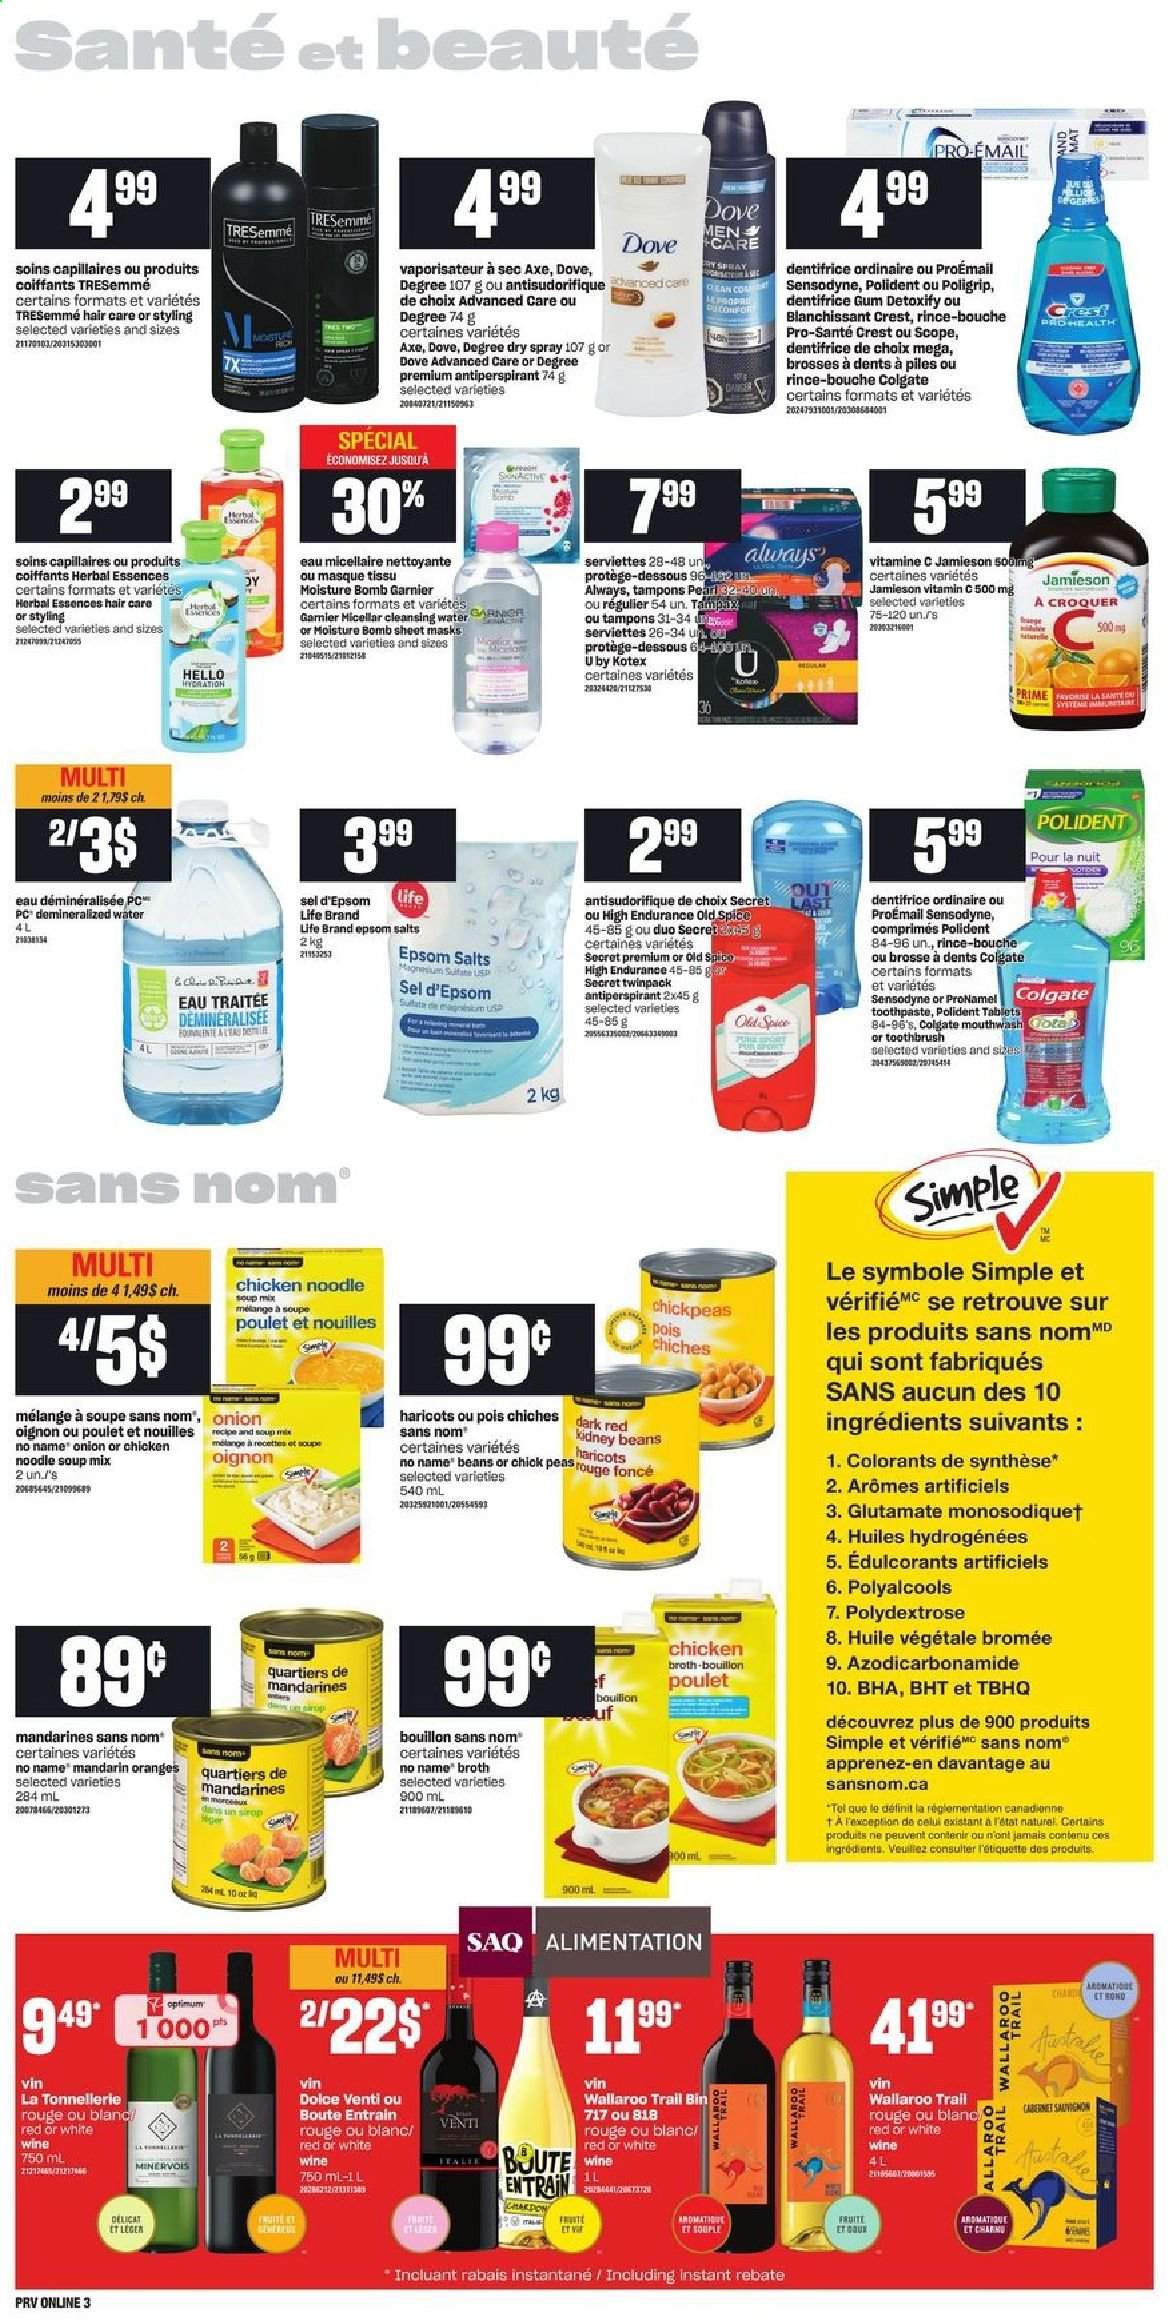 thumbnail - Provigo Flyer - January 14, 2021 - January 20, 2021 - Sales products - mandarines, No Name, soup mix, soup, noodles cup, noodles, bouillon, broth, kidney beans, chickpeas, spice, Cabernet Sauvignon, wine, toothbrush, toothpaste, mouthwash, Polident, Crest, Kotex, tampons, TRESemmé, Herbal Essences, anti-perspirant, magnesium, Garnier, Tampax, Old Spice, Sensodyne. Page 7.